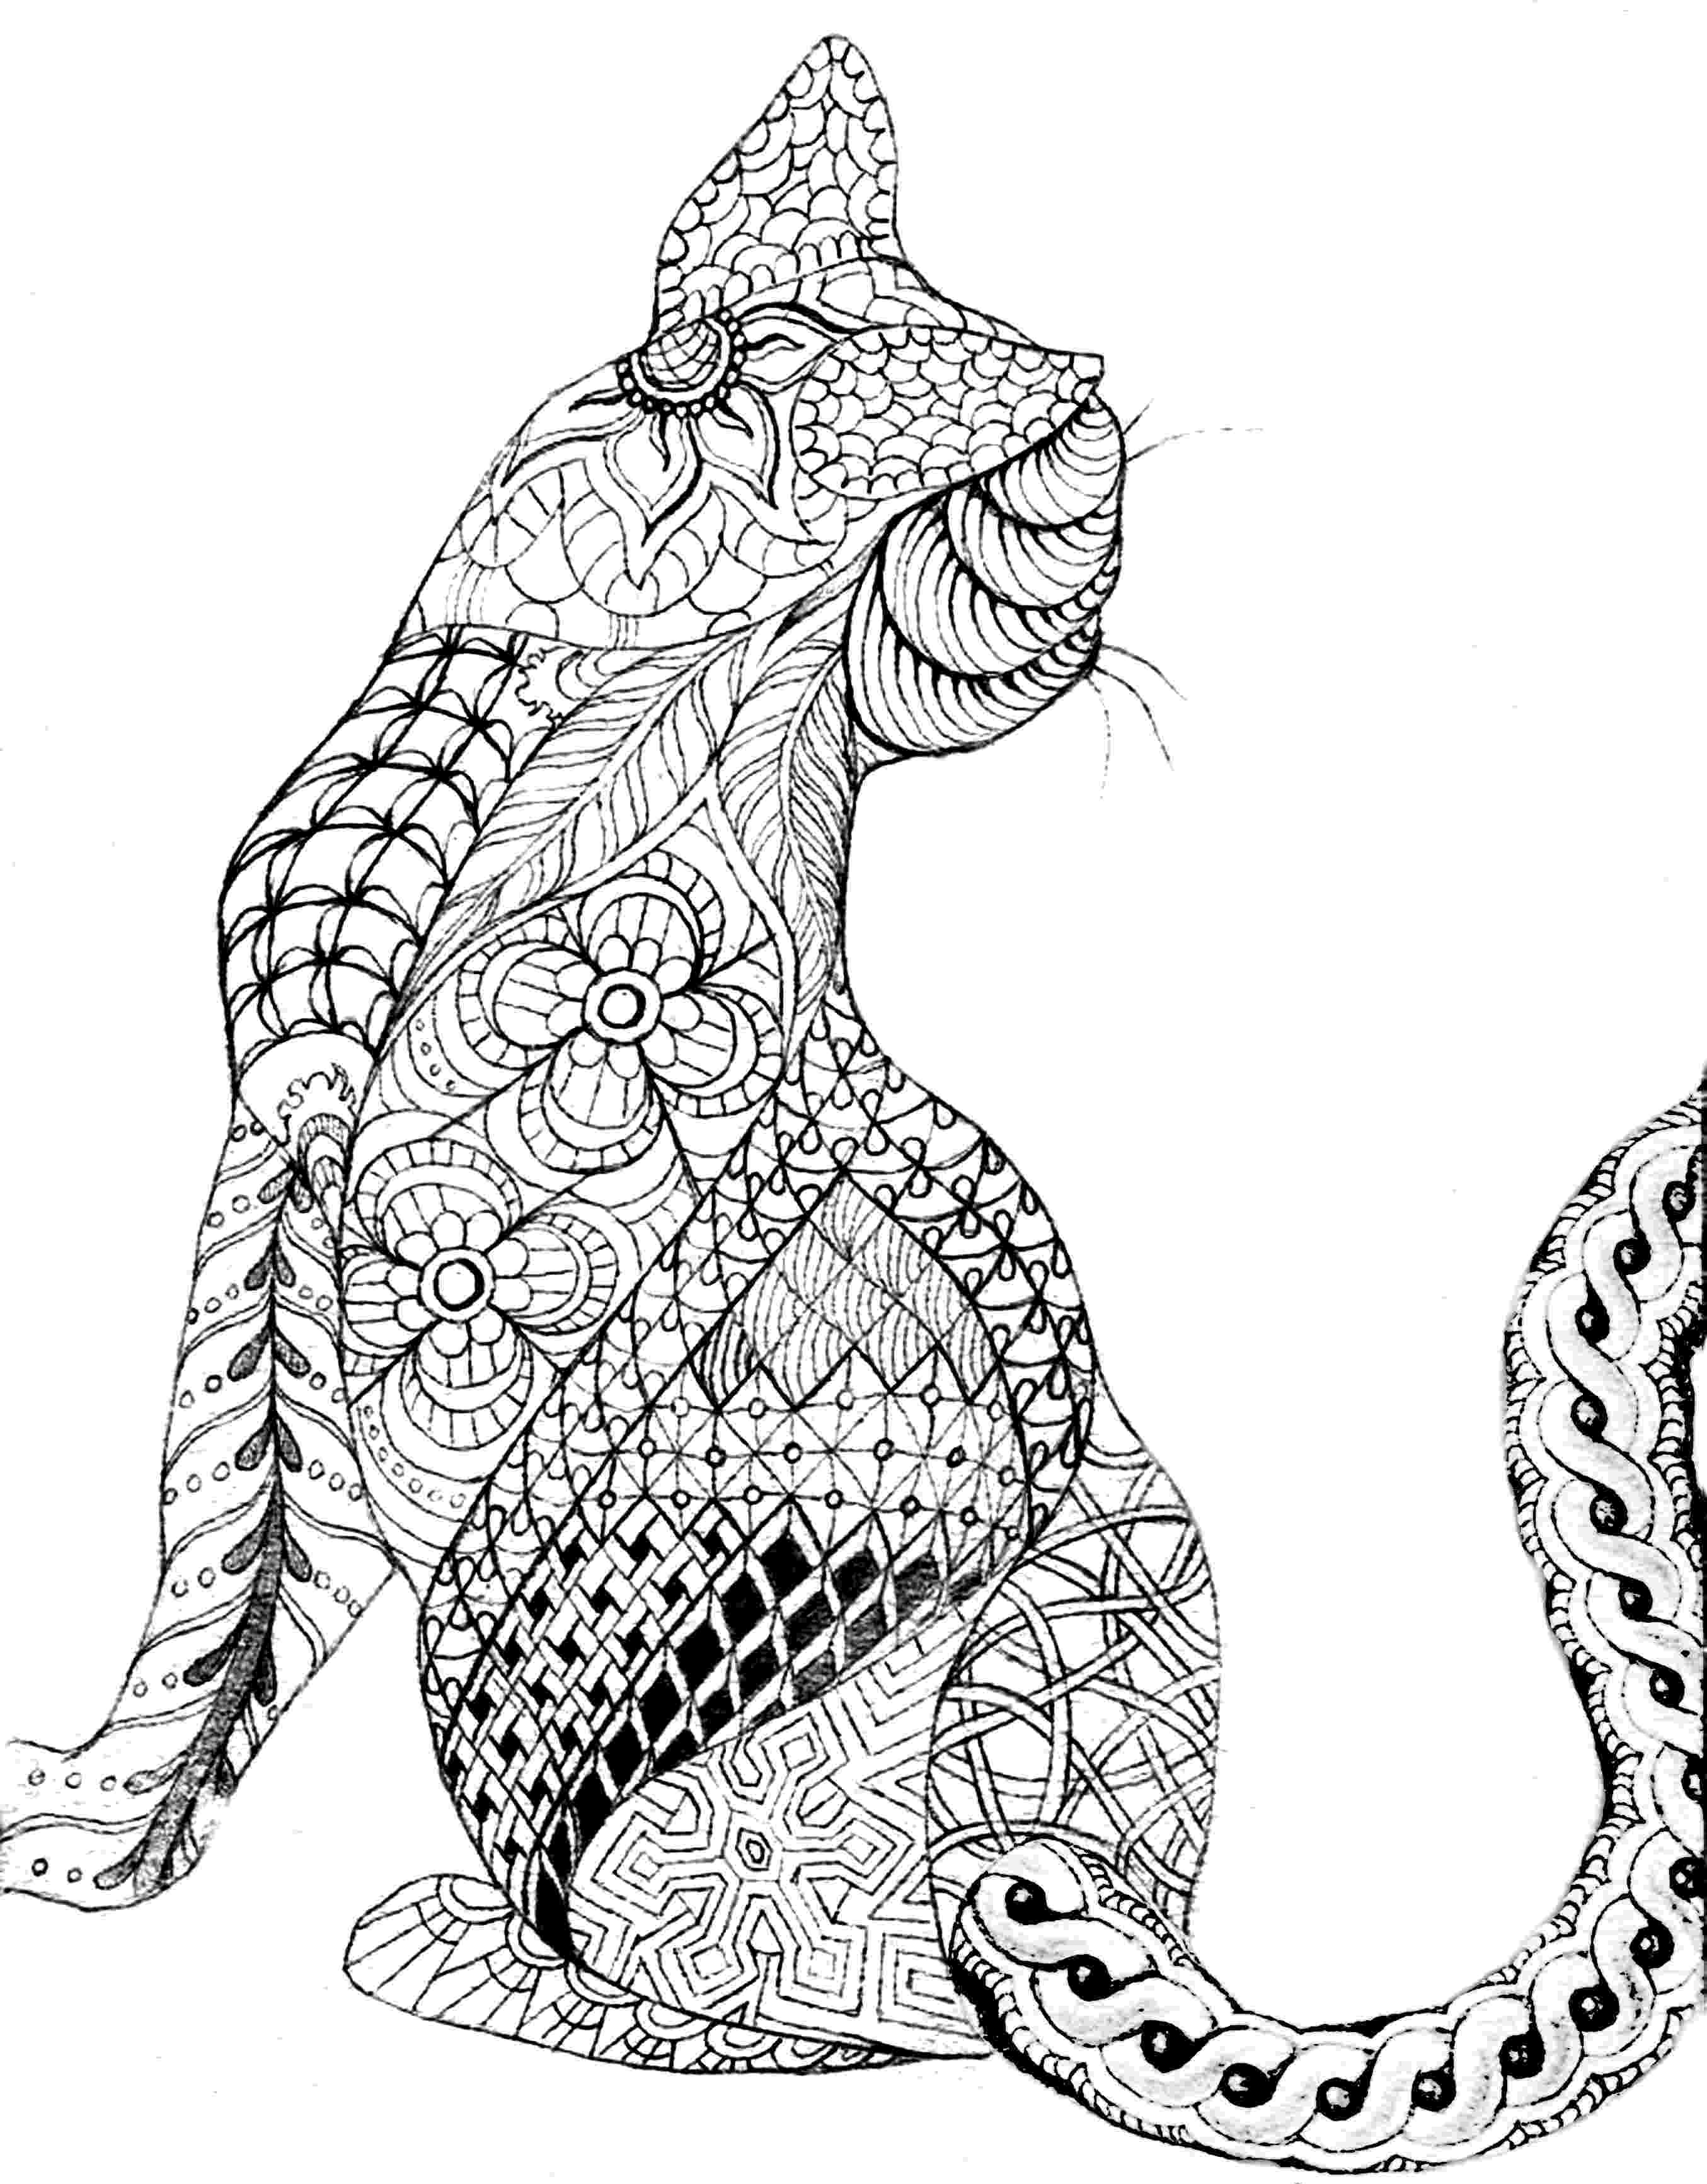 animal patterns colouring pages free printable adult coloring pages pages patterns colouring animal 